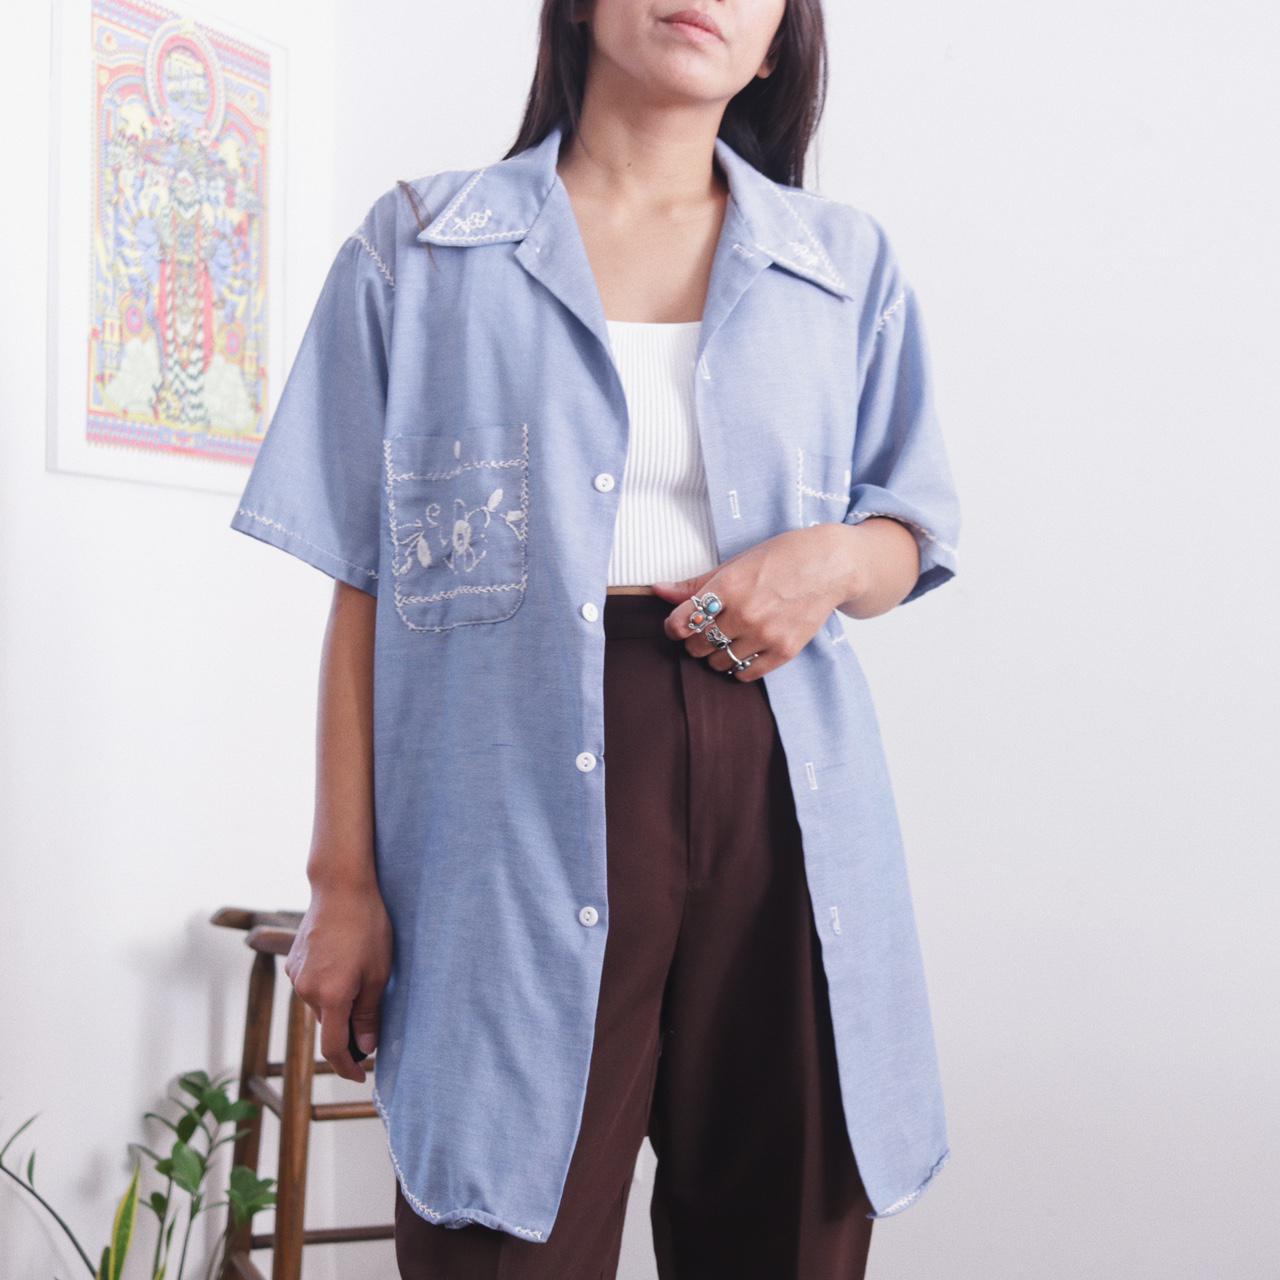 Product Image 1 - vintage 70s chambray shirt

DESCRIPTION
western style